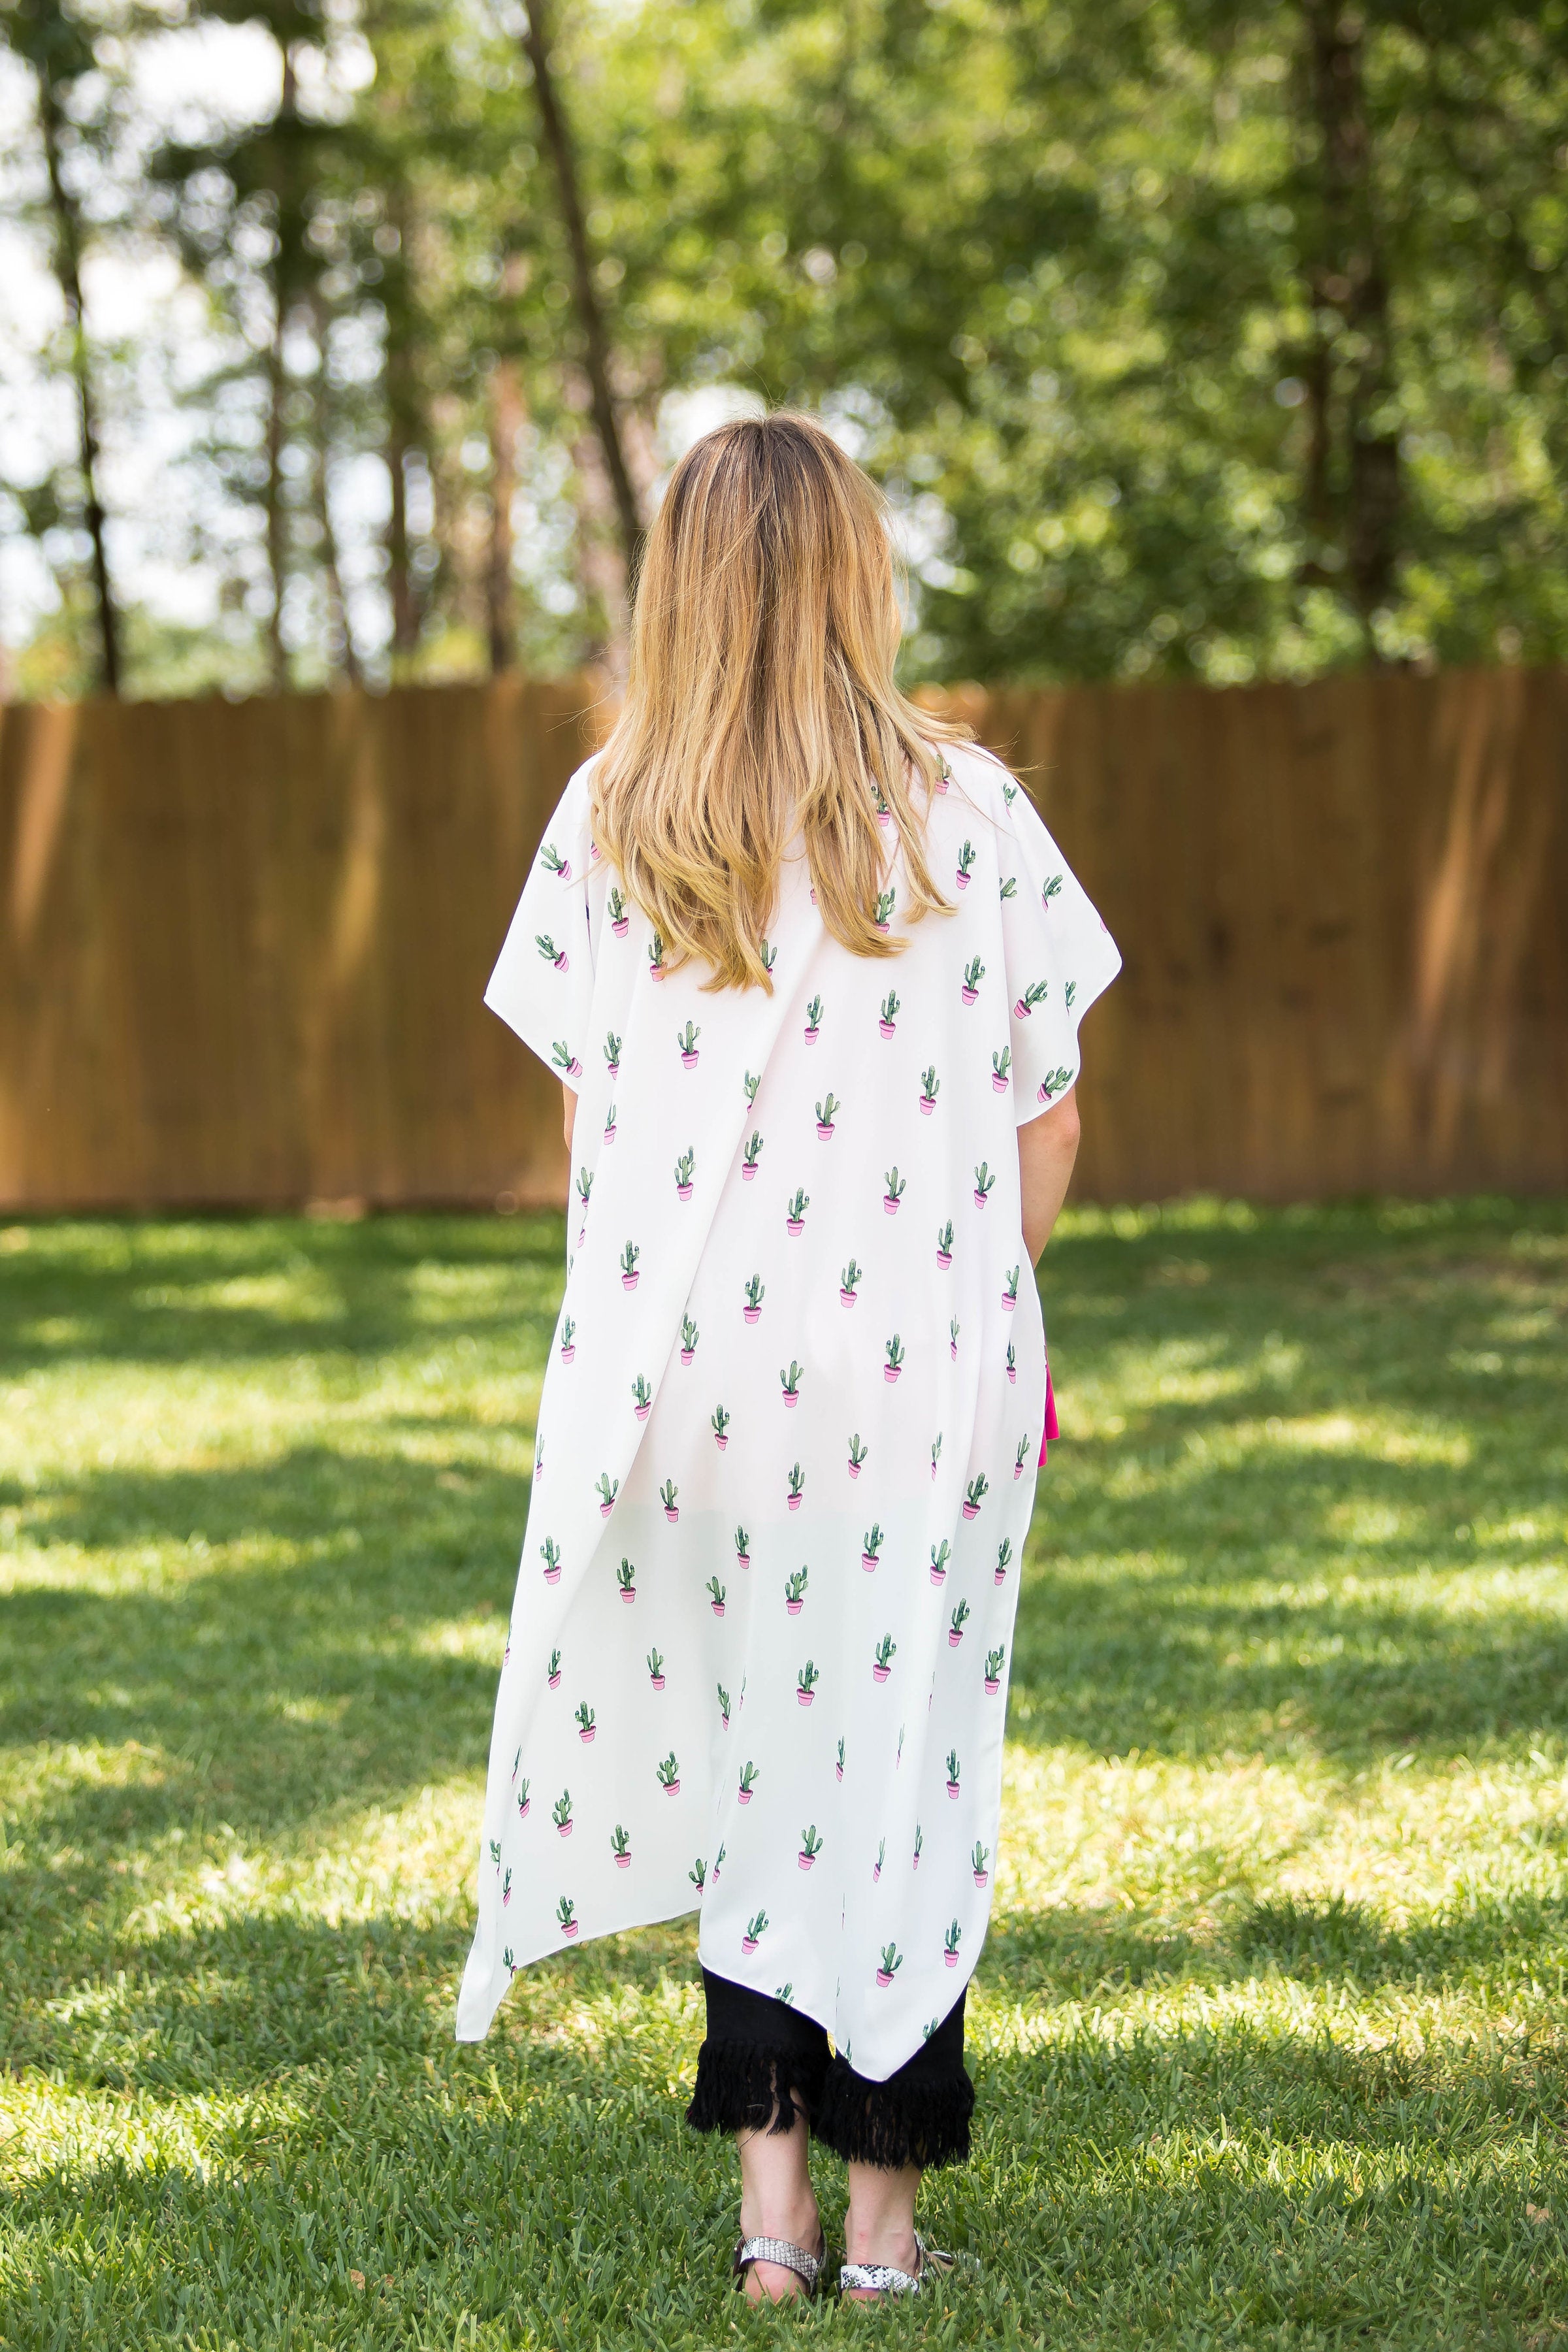 Cactus Clothing | Cactus Print Clothes | Desert Rose Collection